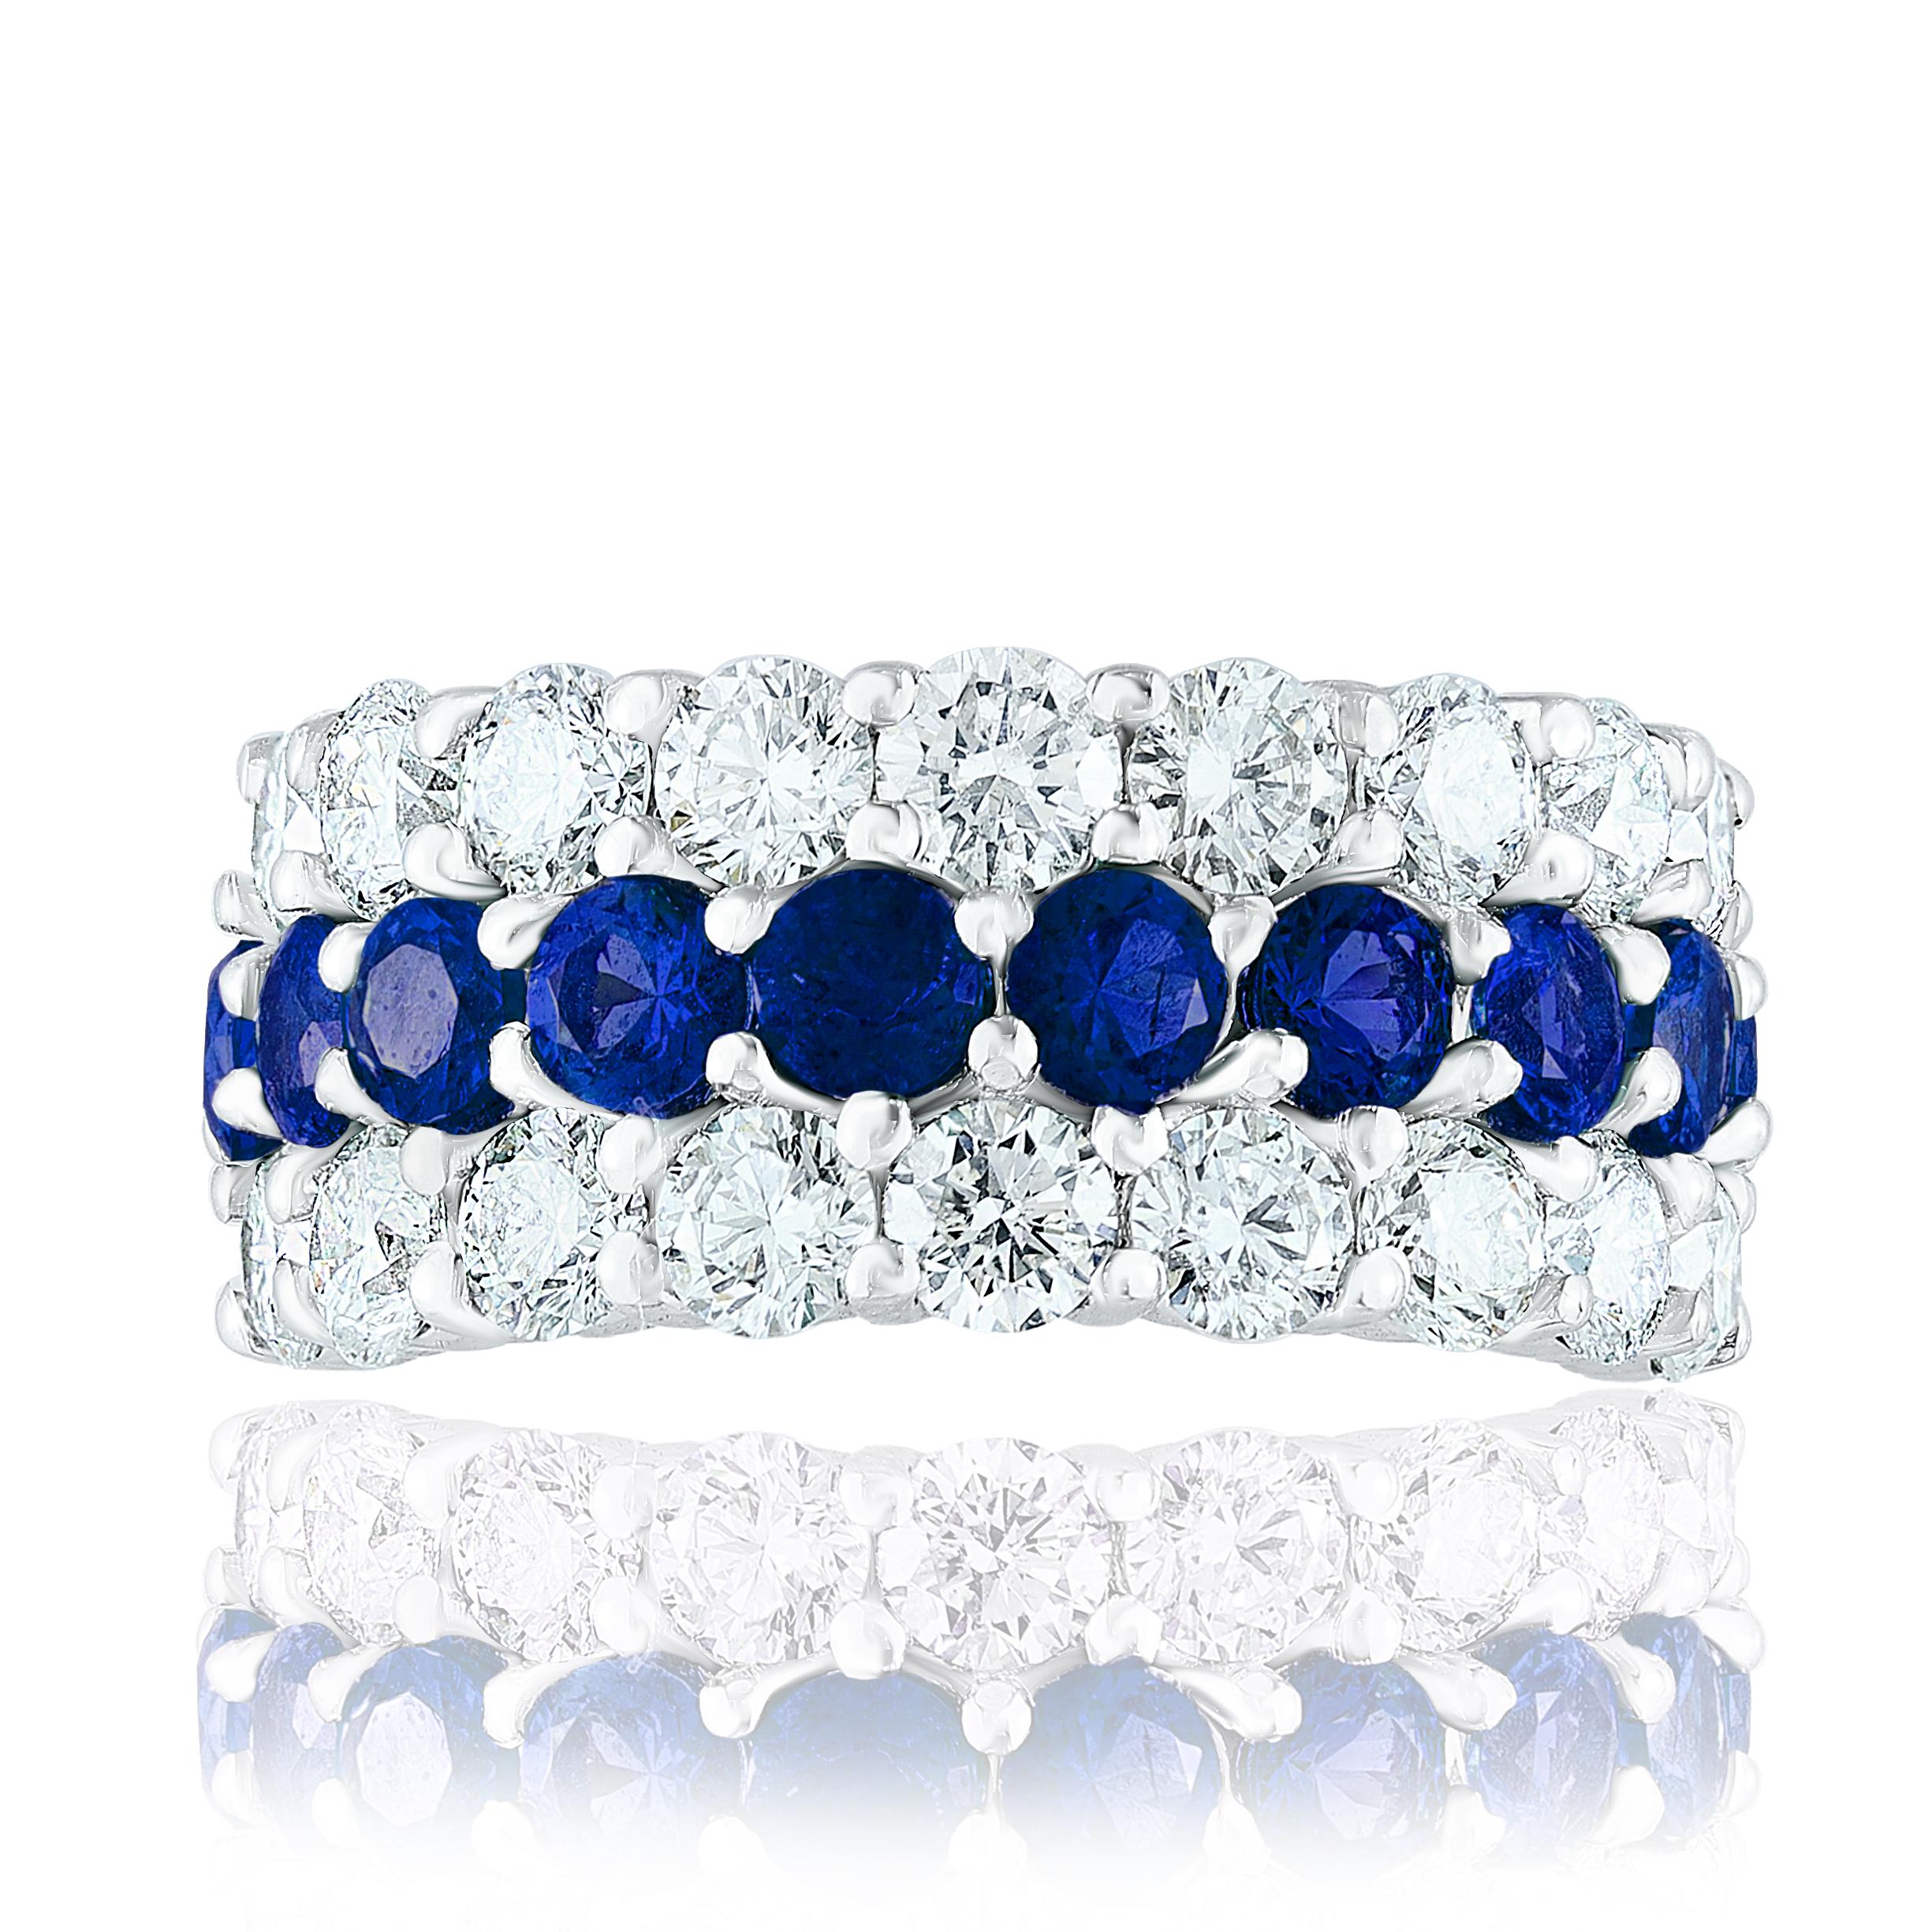 A unique and fashionable ring showcasing two rows of round-shape 18 diamonds and one row of 10 vibrant blue sapphires in the middle, set in a band design. Blue Sapphire weigh 2.60 carats and Diamonds weigh 2.70 carats total. A brilliant and